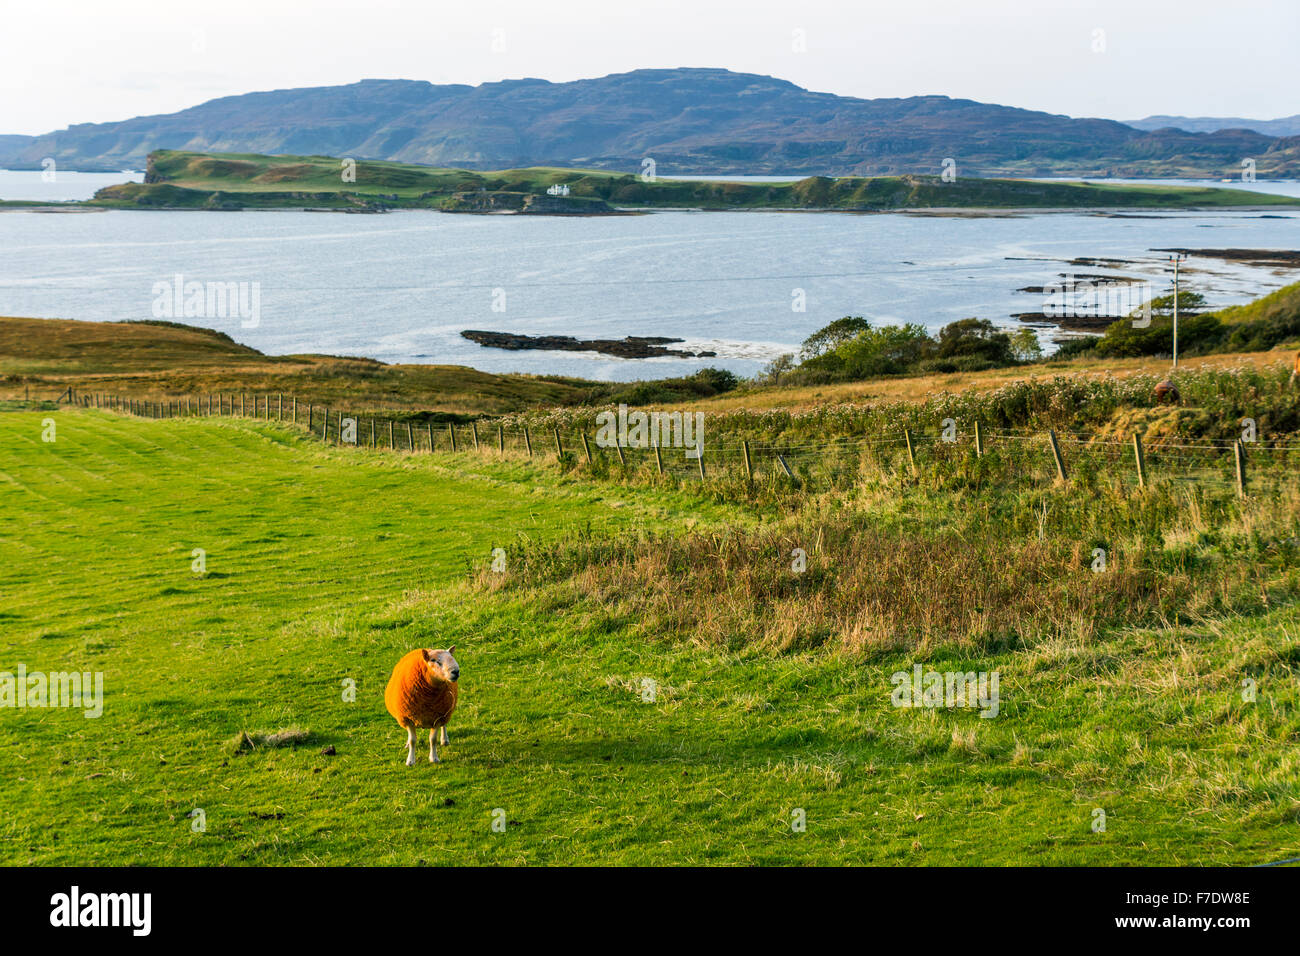 Loch na Keal, Ulva and Inch Kenneth islands from Balnahard, Isle of Mull, Argyll & Bute, Scotland UK.  Orange ram in foreground. Stock Photo